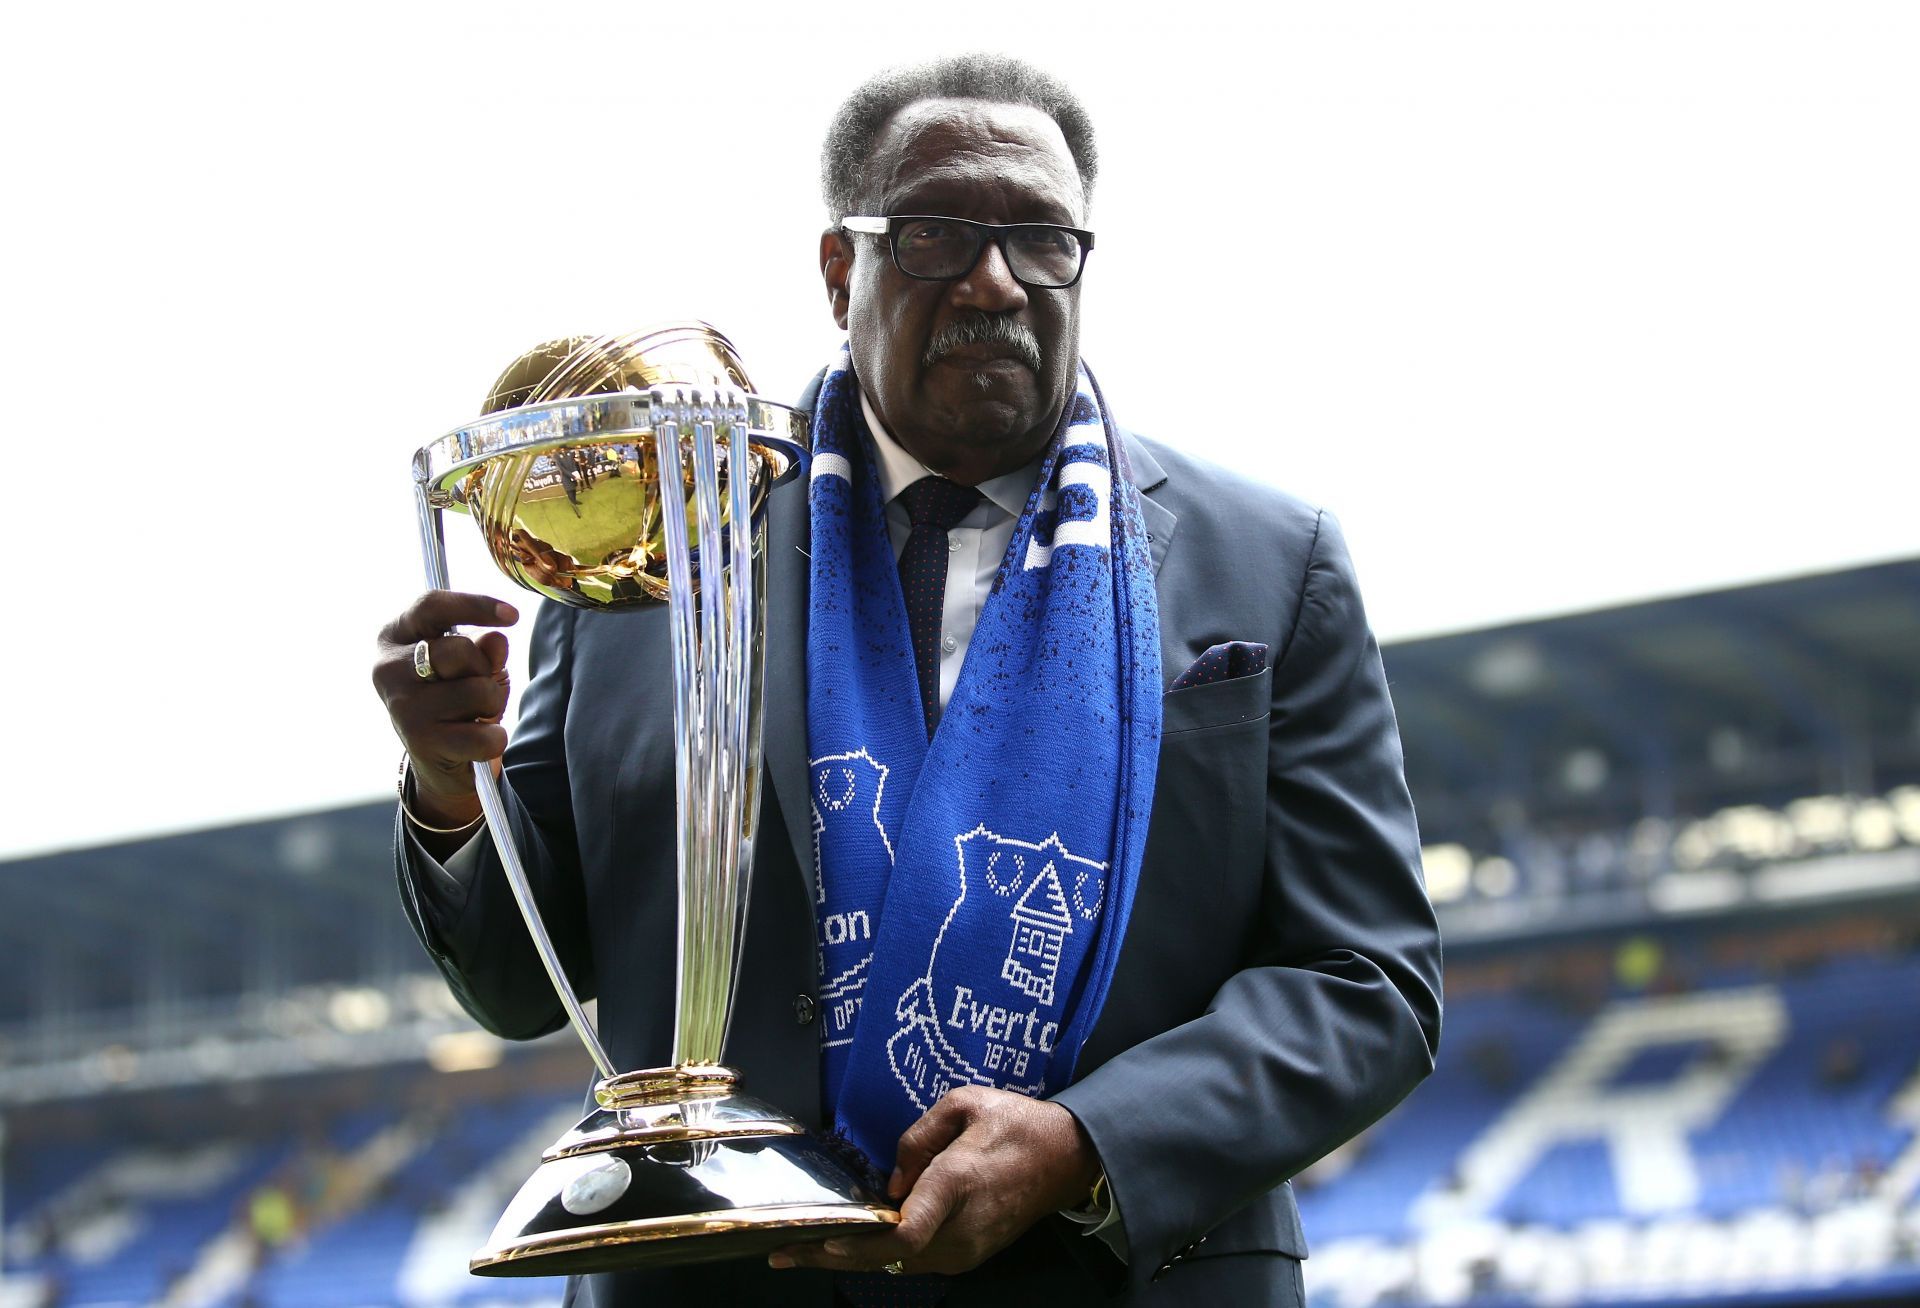 Clive Lloyd, the most successful captain in West Indian cricket history